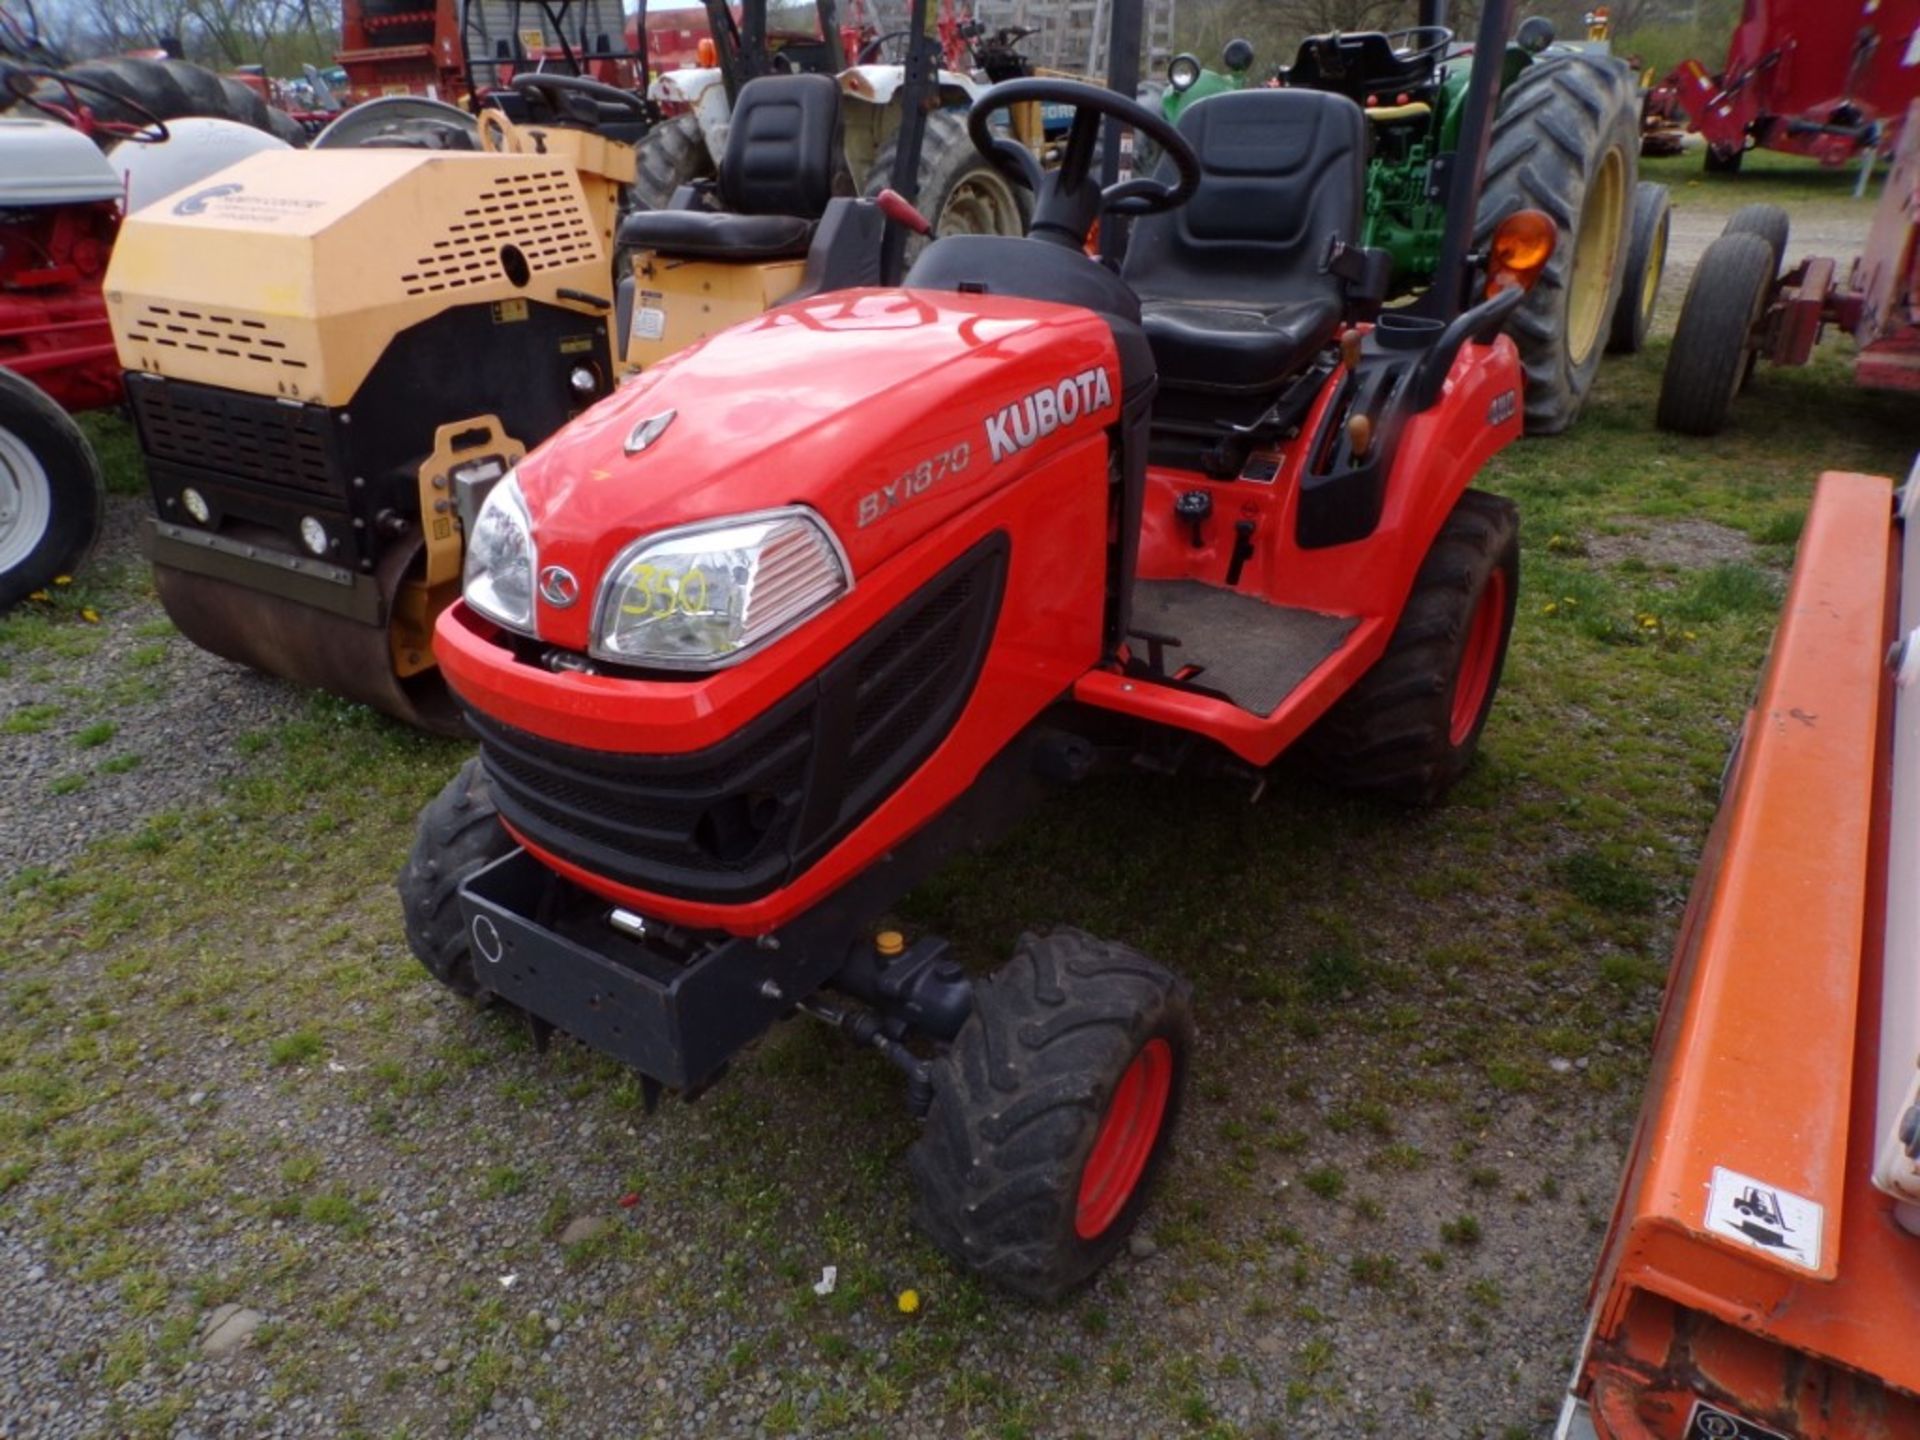 Kubota BX1870 4wd Sub Compact Tractor, Hydro, 400 Hrs., DENTED HOOD, 3pth, S/N 24593 (4424) - Image 3 of 4